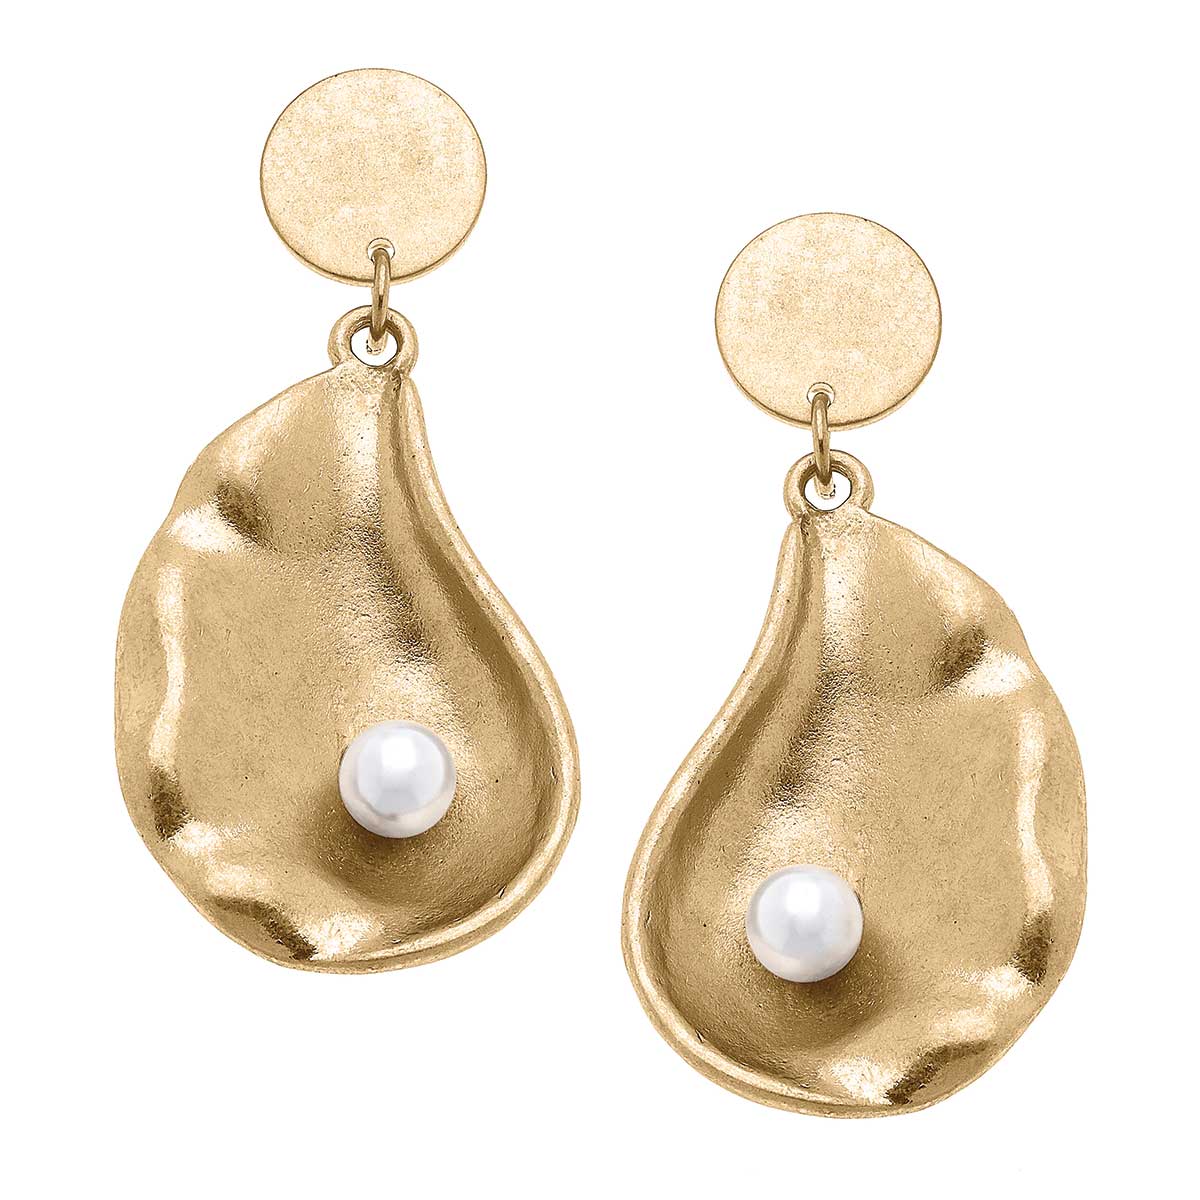 Oyster with Pearl Statement Earrings in Worn Gold